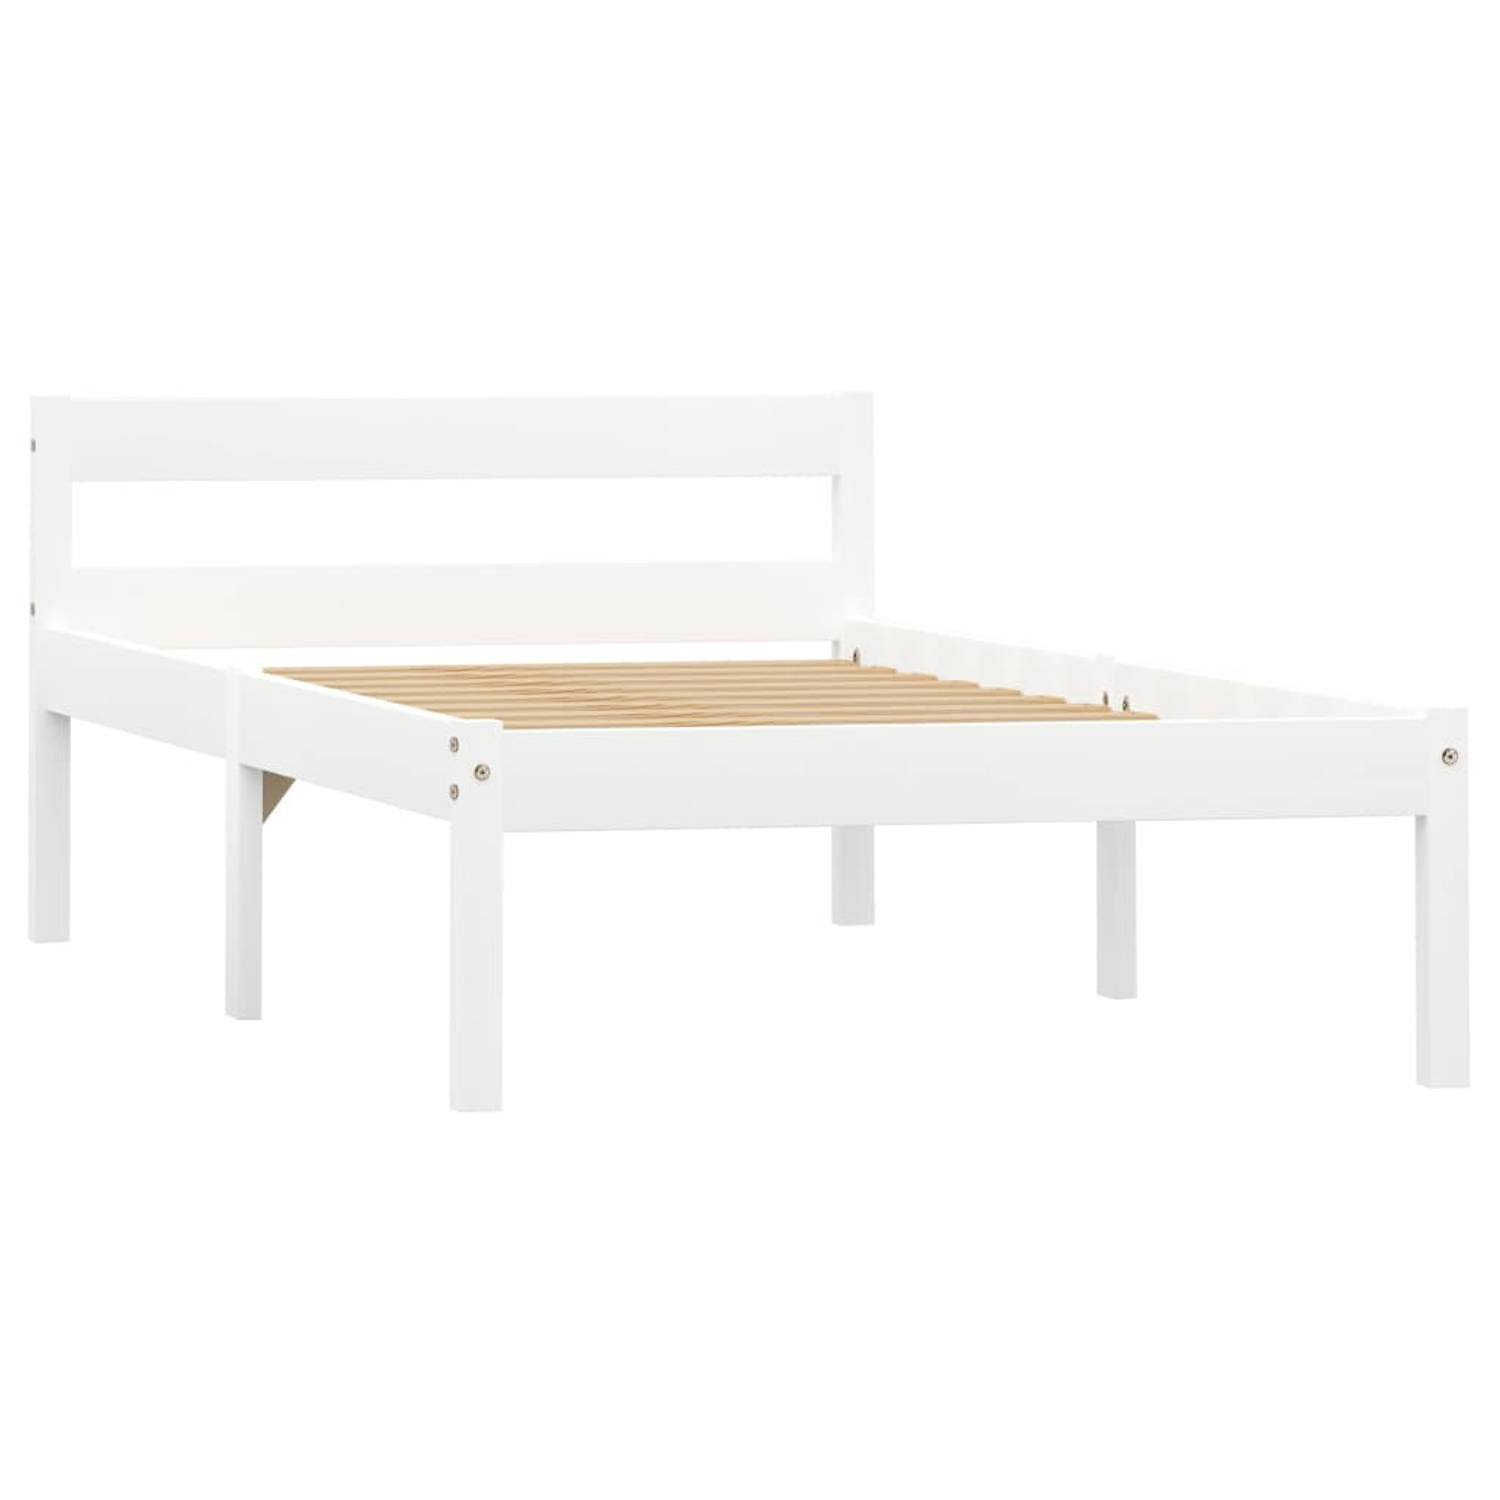 The Living Store Bedframe massief grenenhout wit 100x200 cm - Bed